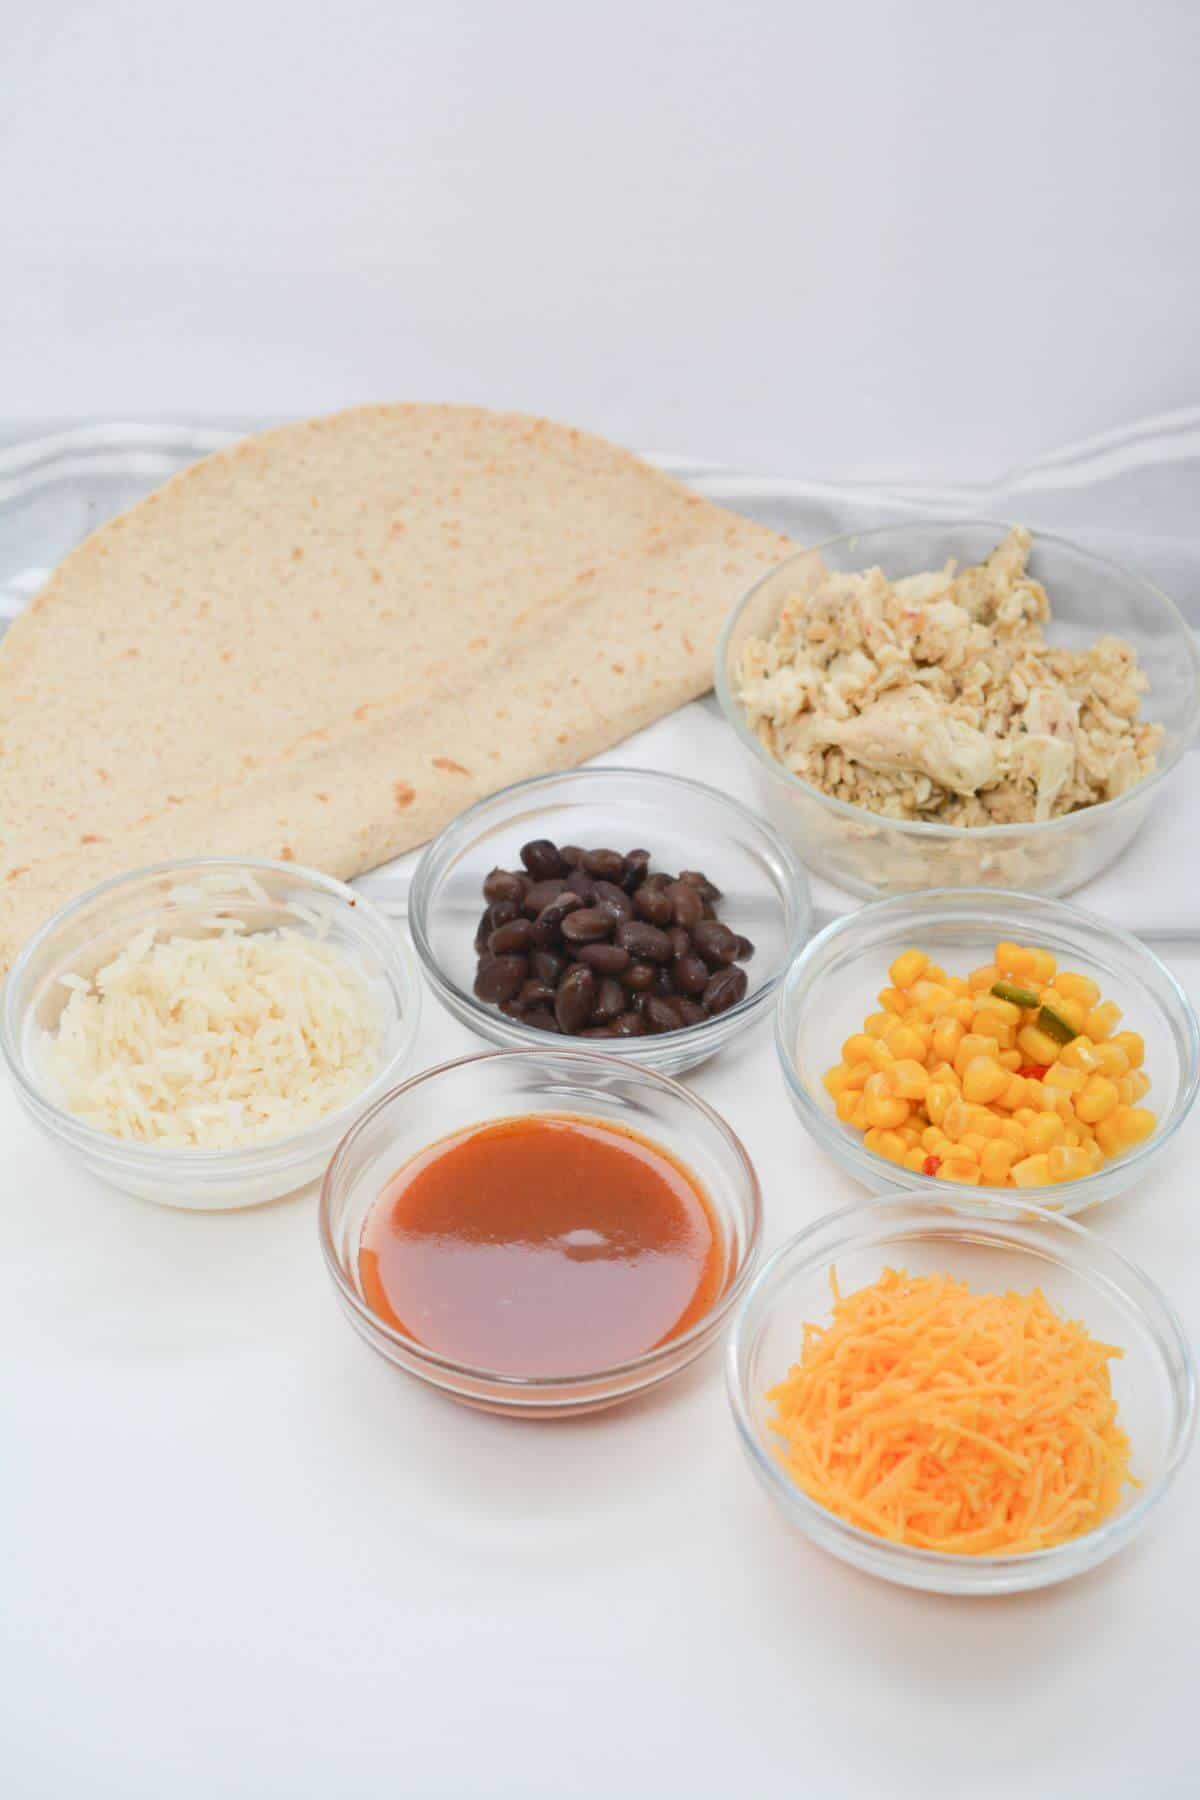 The ingredients for a Mexican wet burrito are laid out on a table.